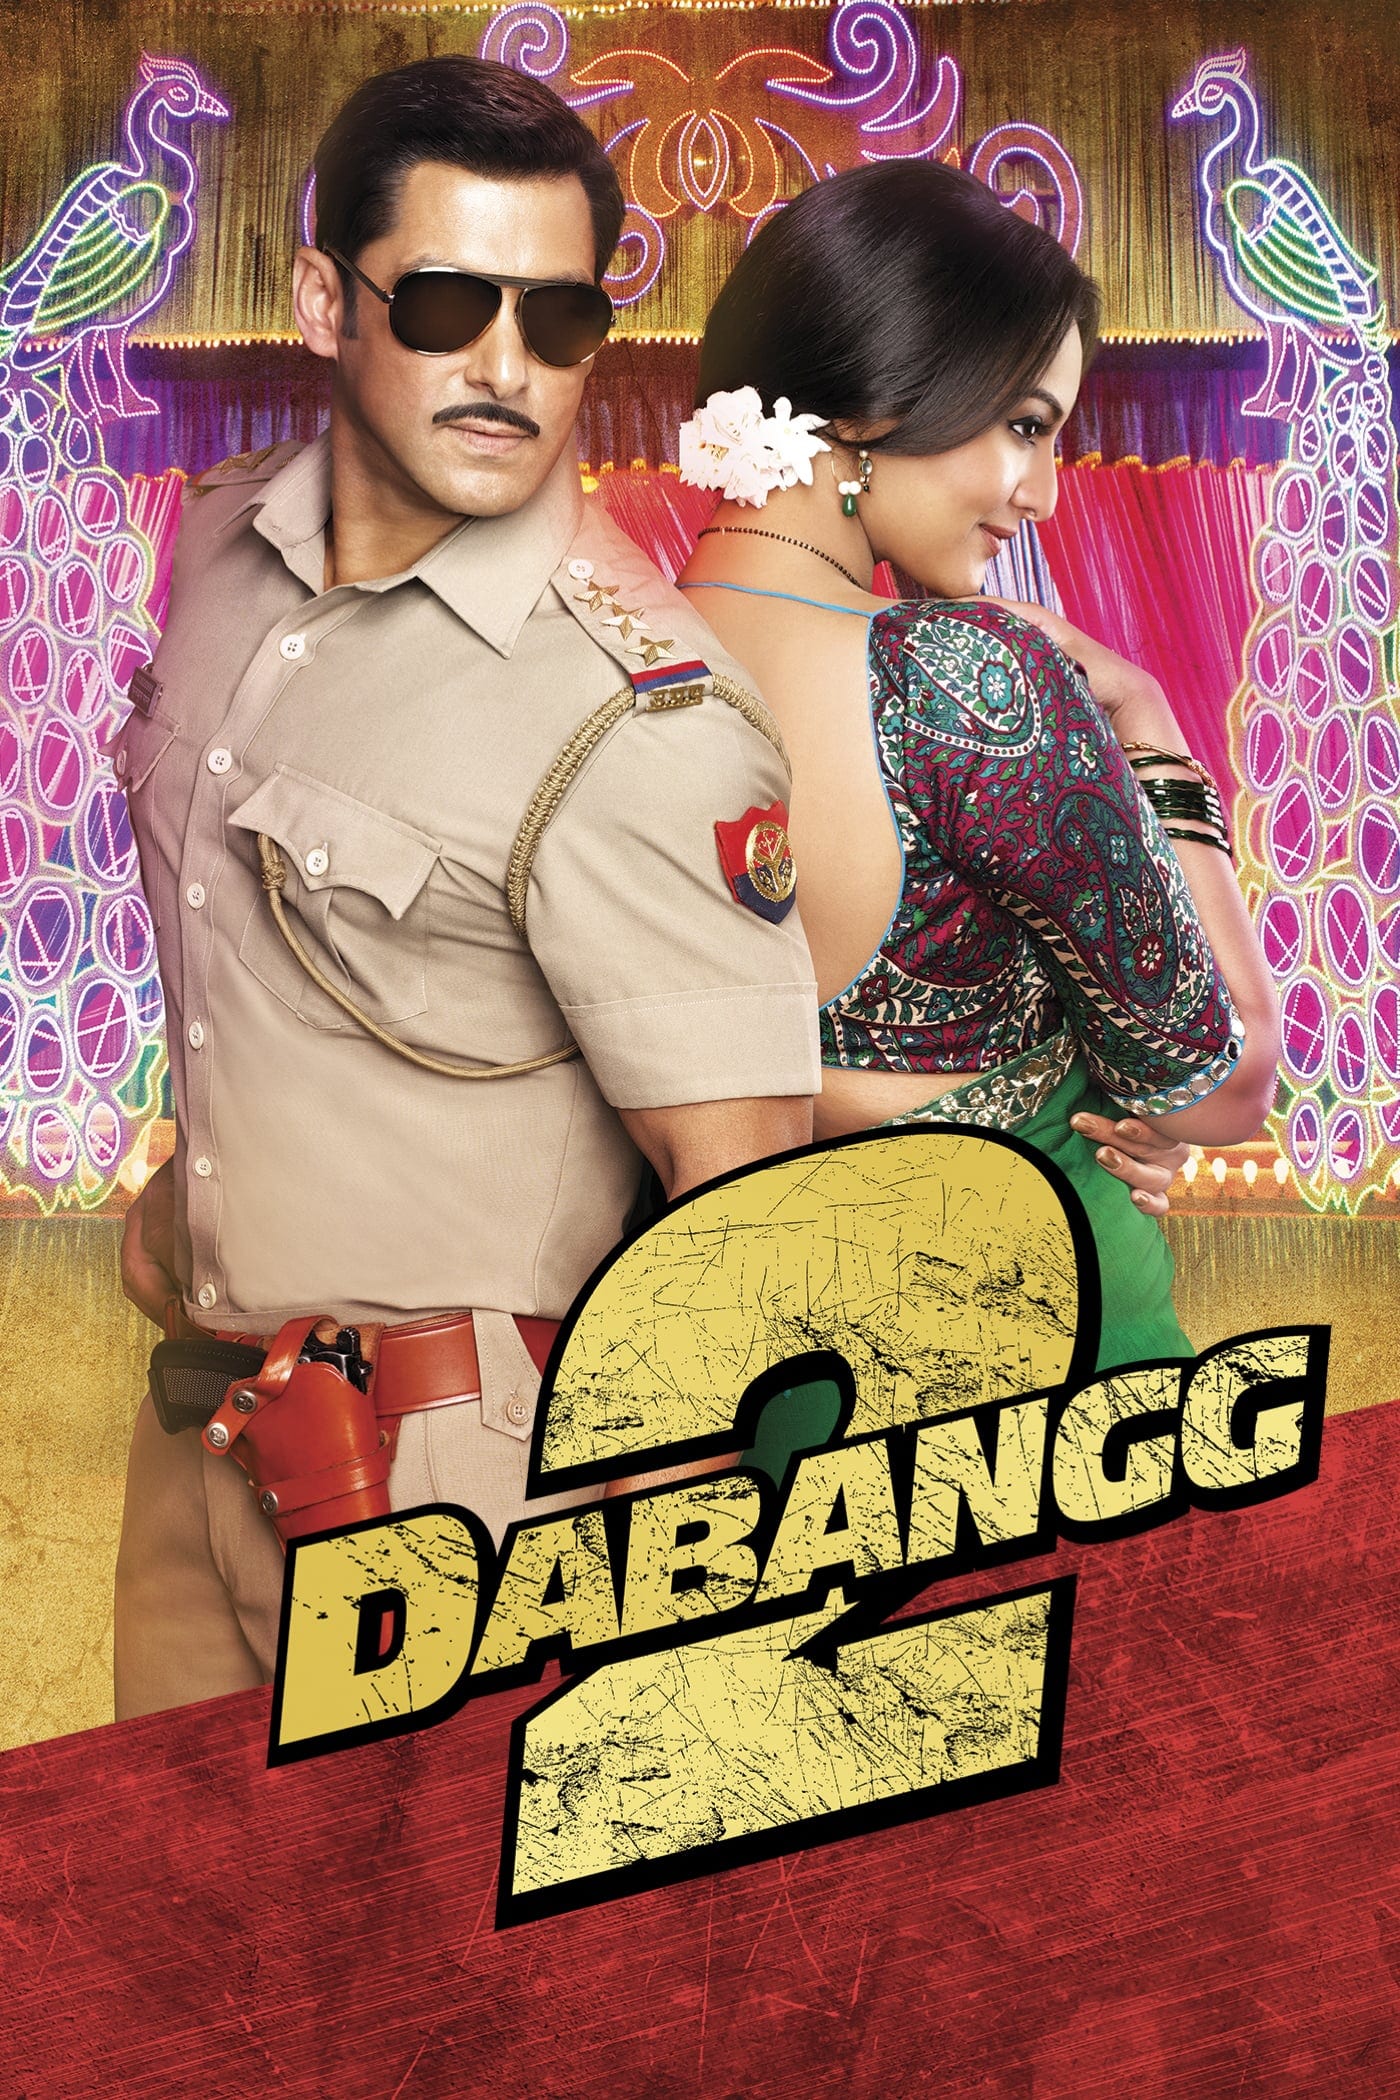 Poster for the movie "Dabangg 2"